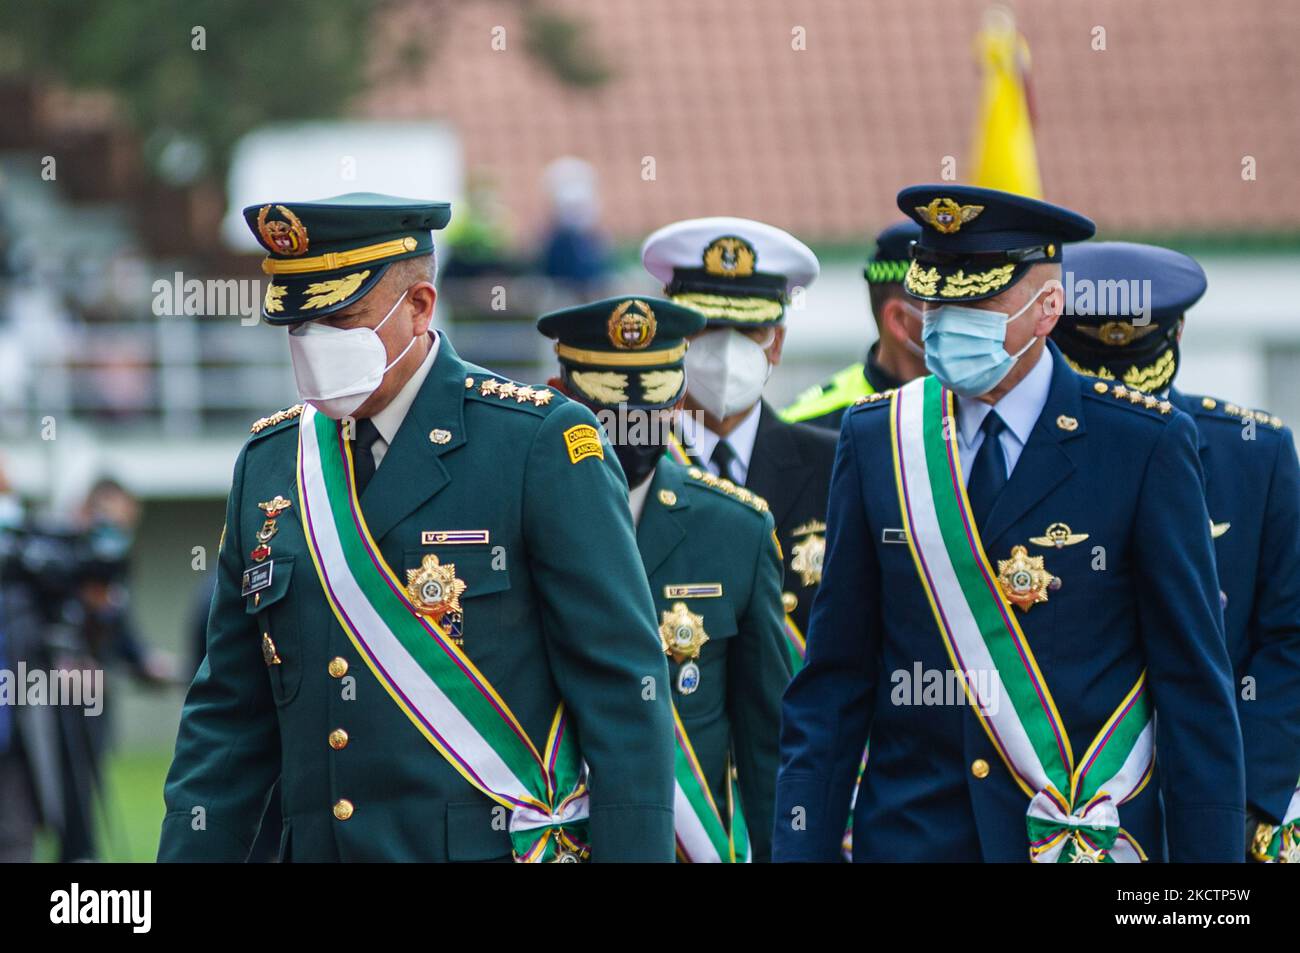 General of the Military Forces of Colombia Luis Fernando Navarro during an event were Colombia's president Ivan Duque Marquez and Colombia's Minister of Defense Diego Molano in conmmemoration of the 130 anniversary of Colombia's National Police and the promotion to officers to more than a 100 police members, in Bogota, Colombia on November 11, 2021. (Photo by Sebastian Barros/NurPhoto) Stock Photo